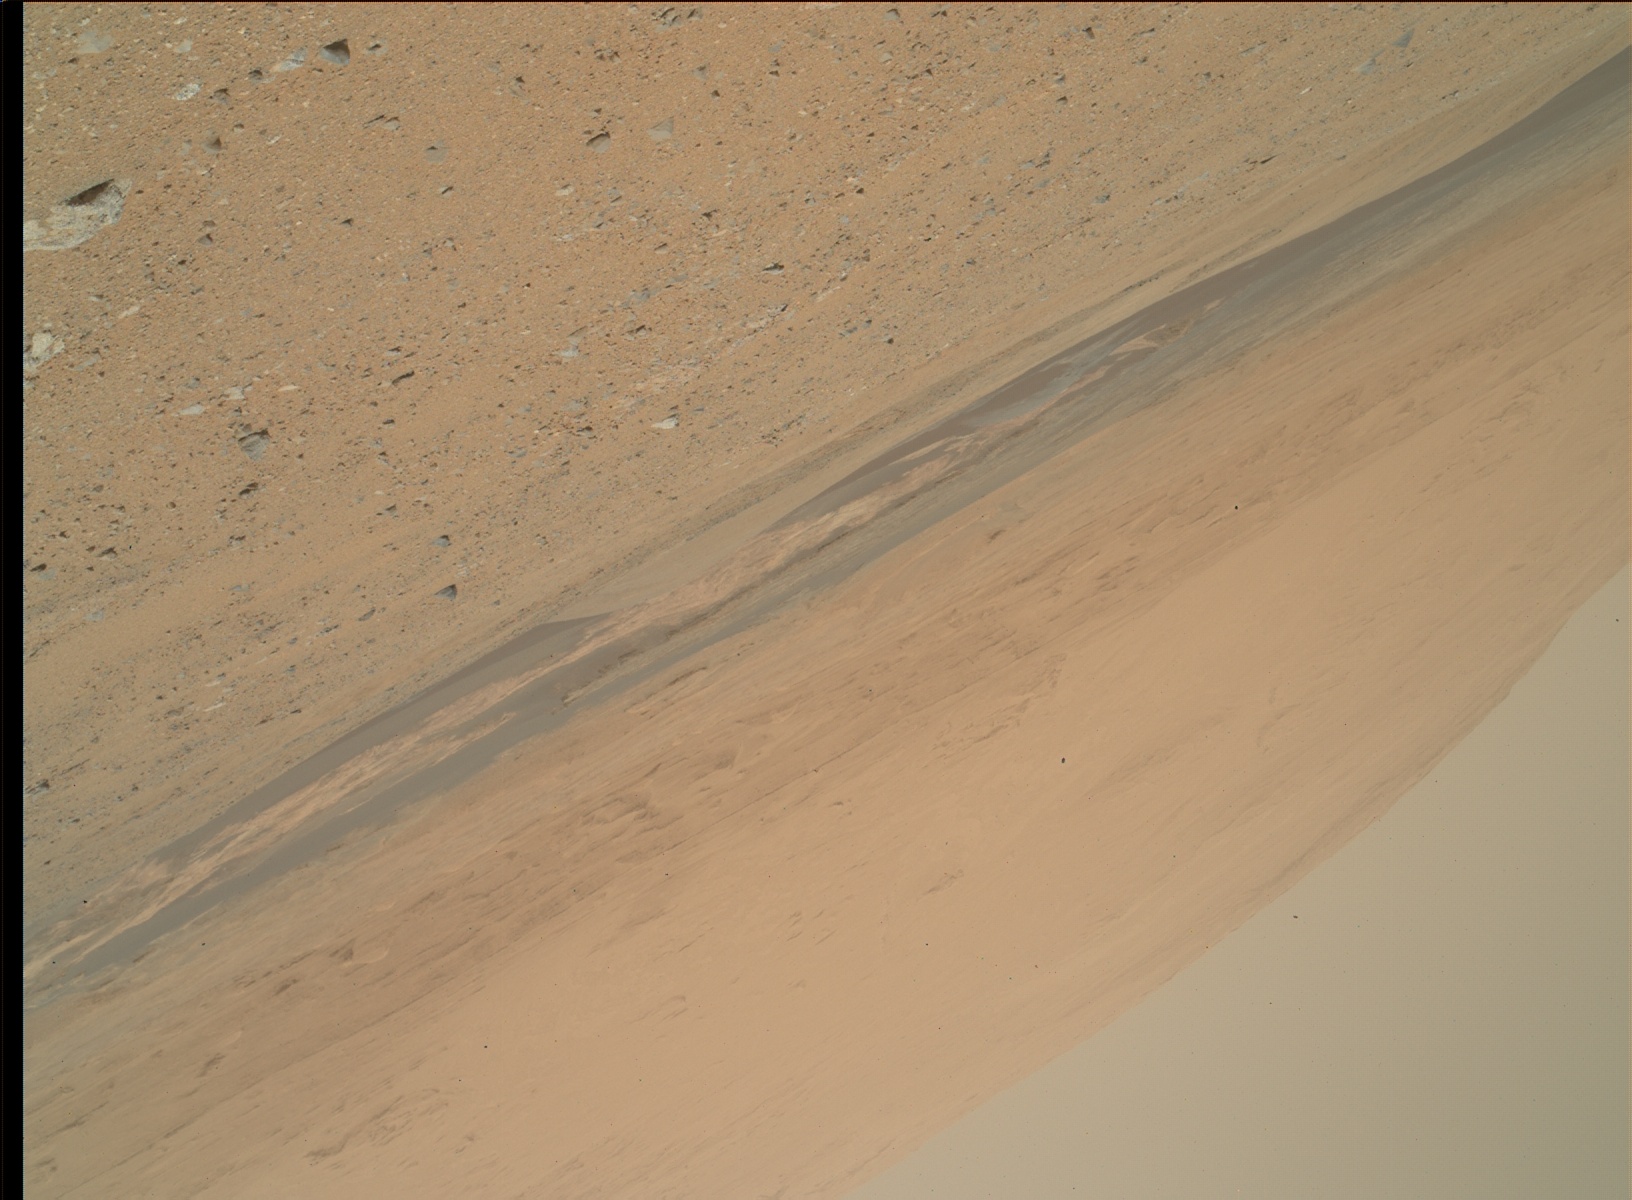 Nasa's Mars rover Curiosity acquired this image using its Mars Hand Lens Imager (MAHLI) on Sol 343